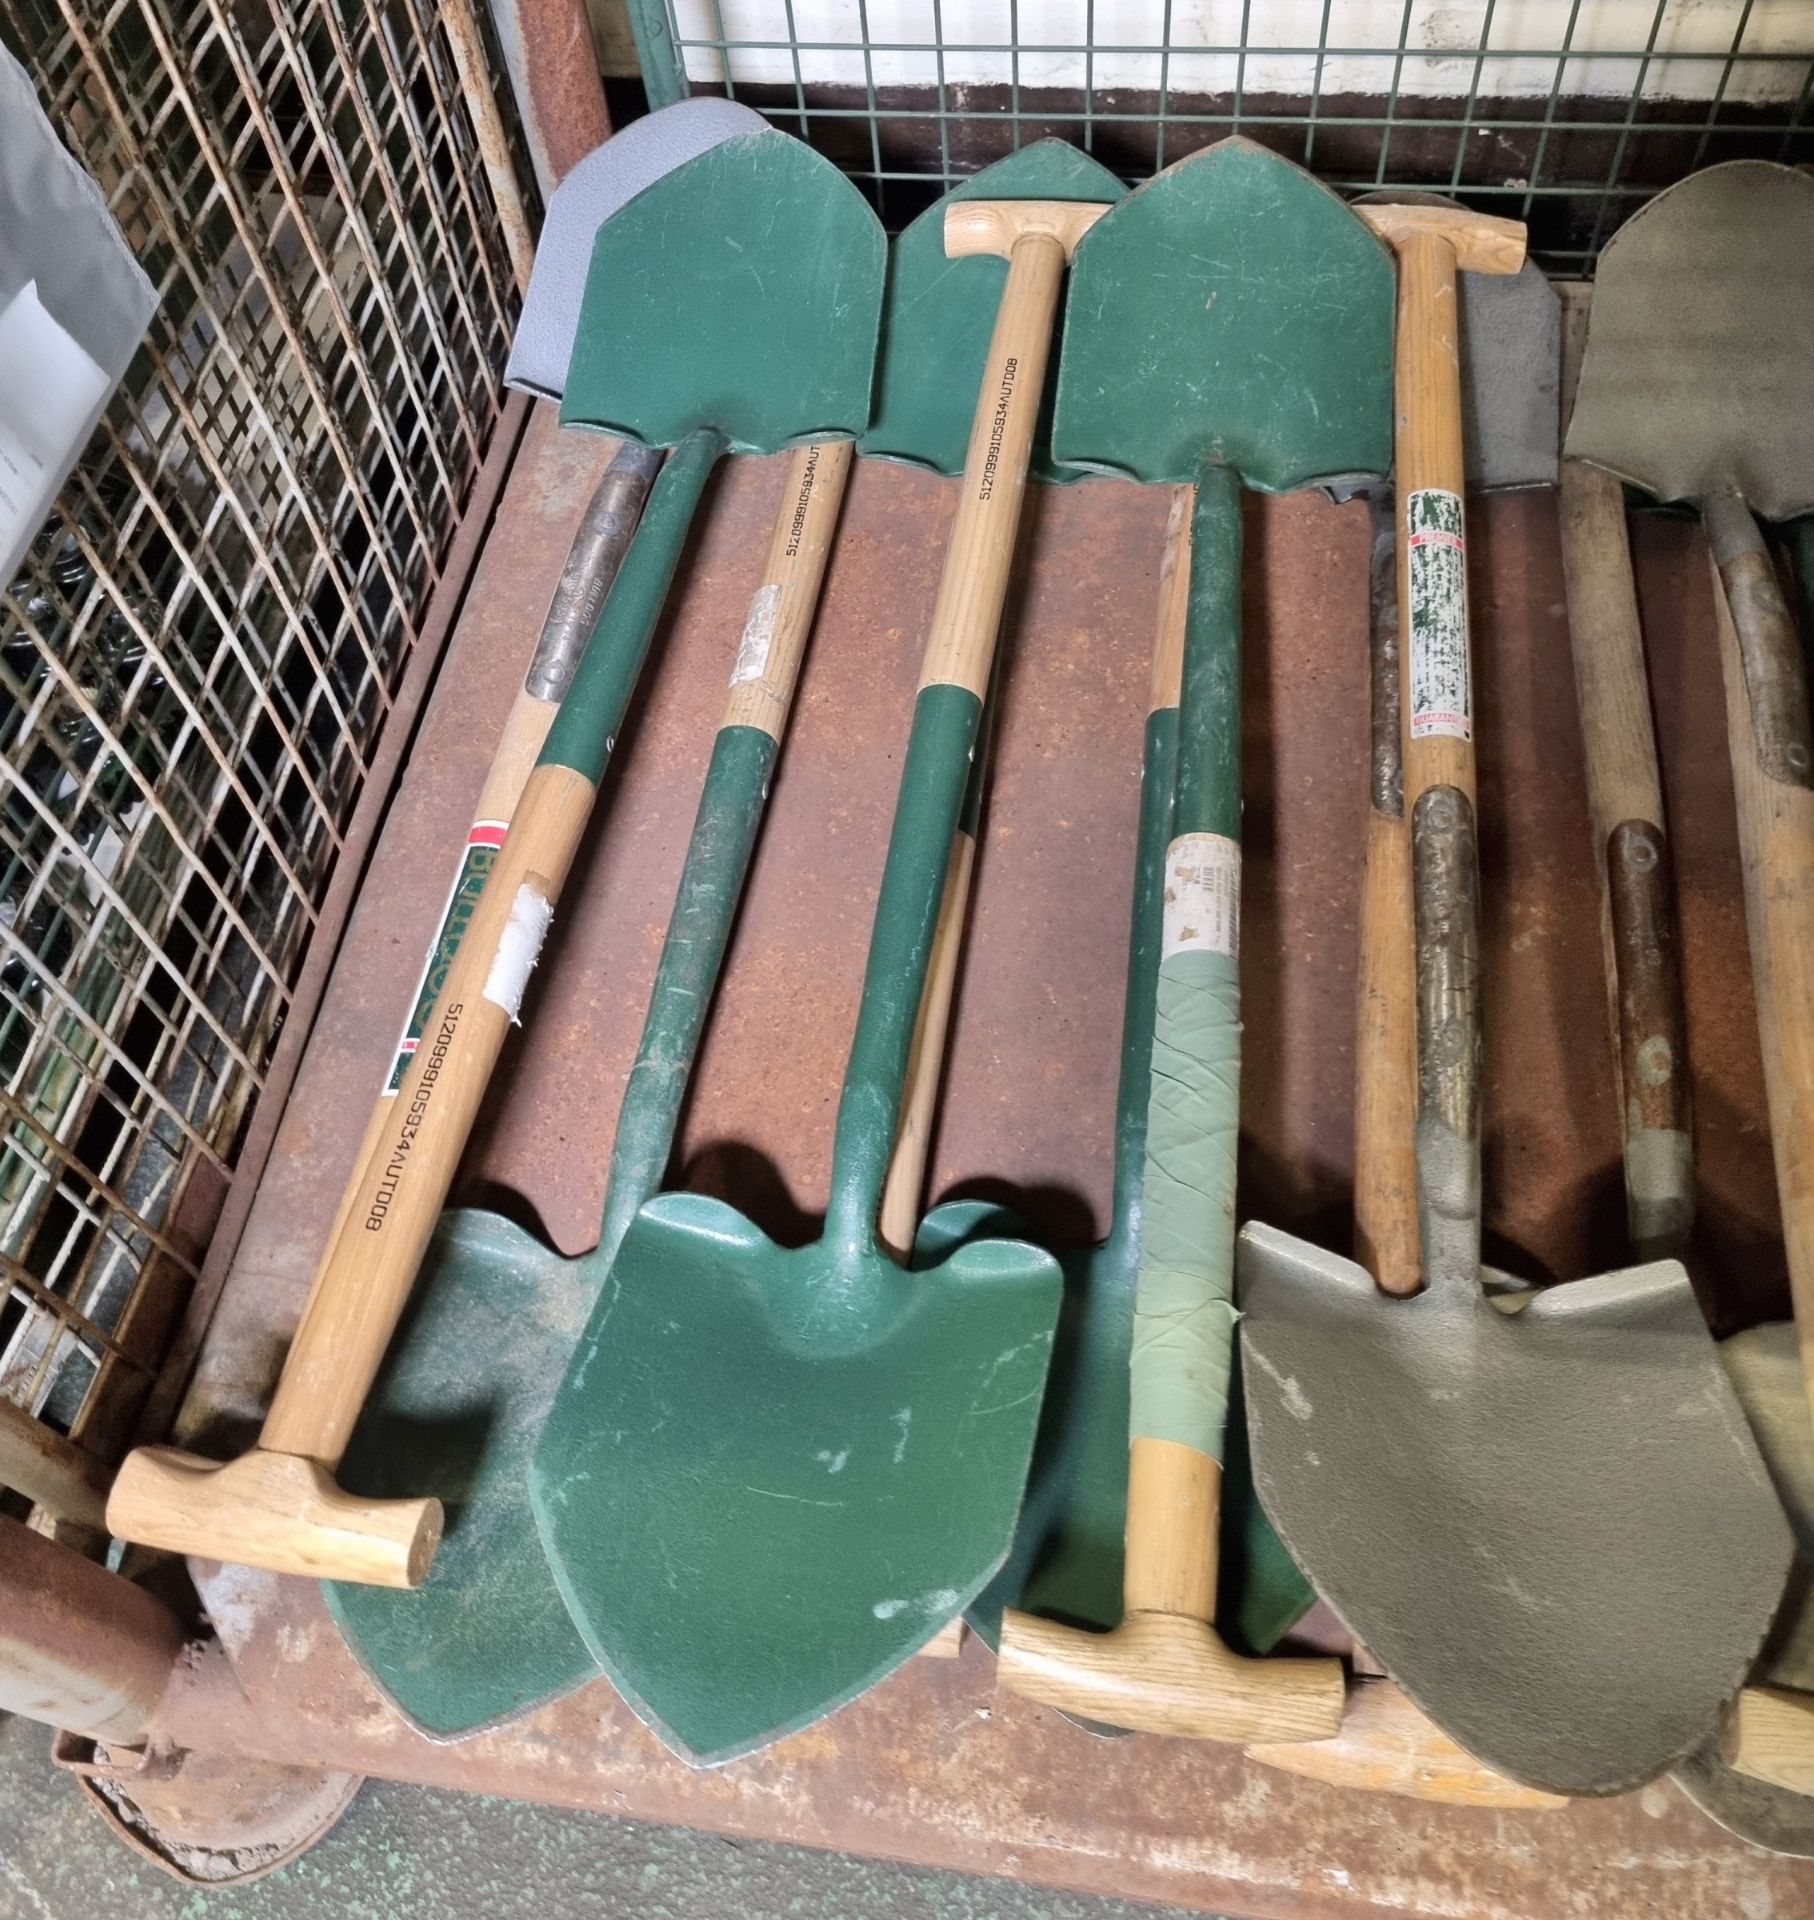 16x Wooden handle Round head shovels - Image 4 of 4